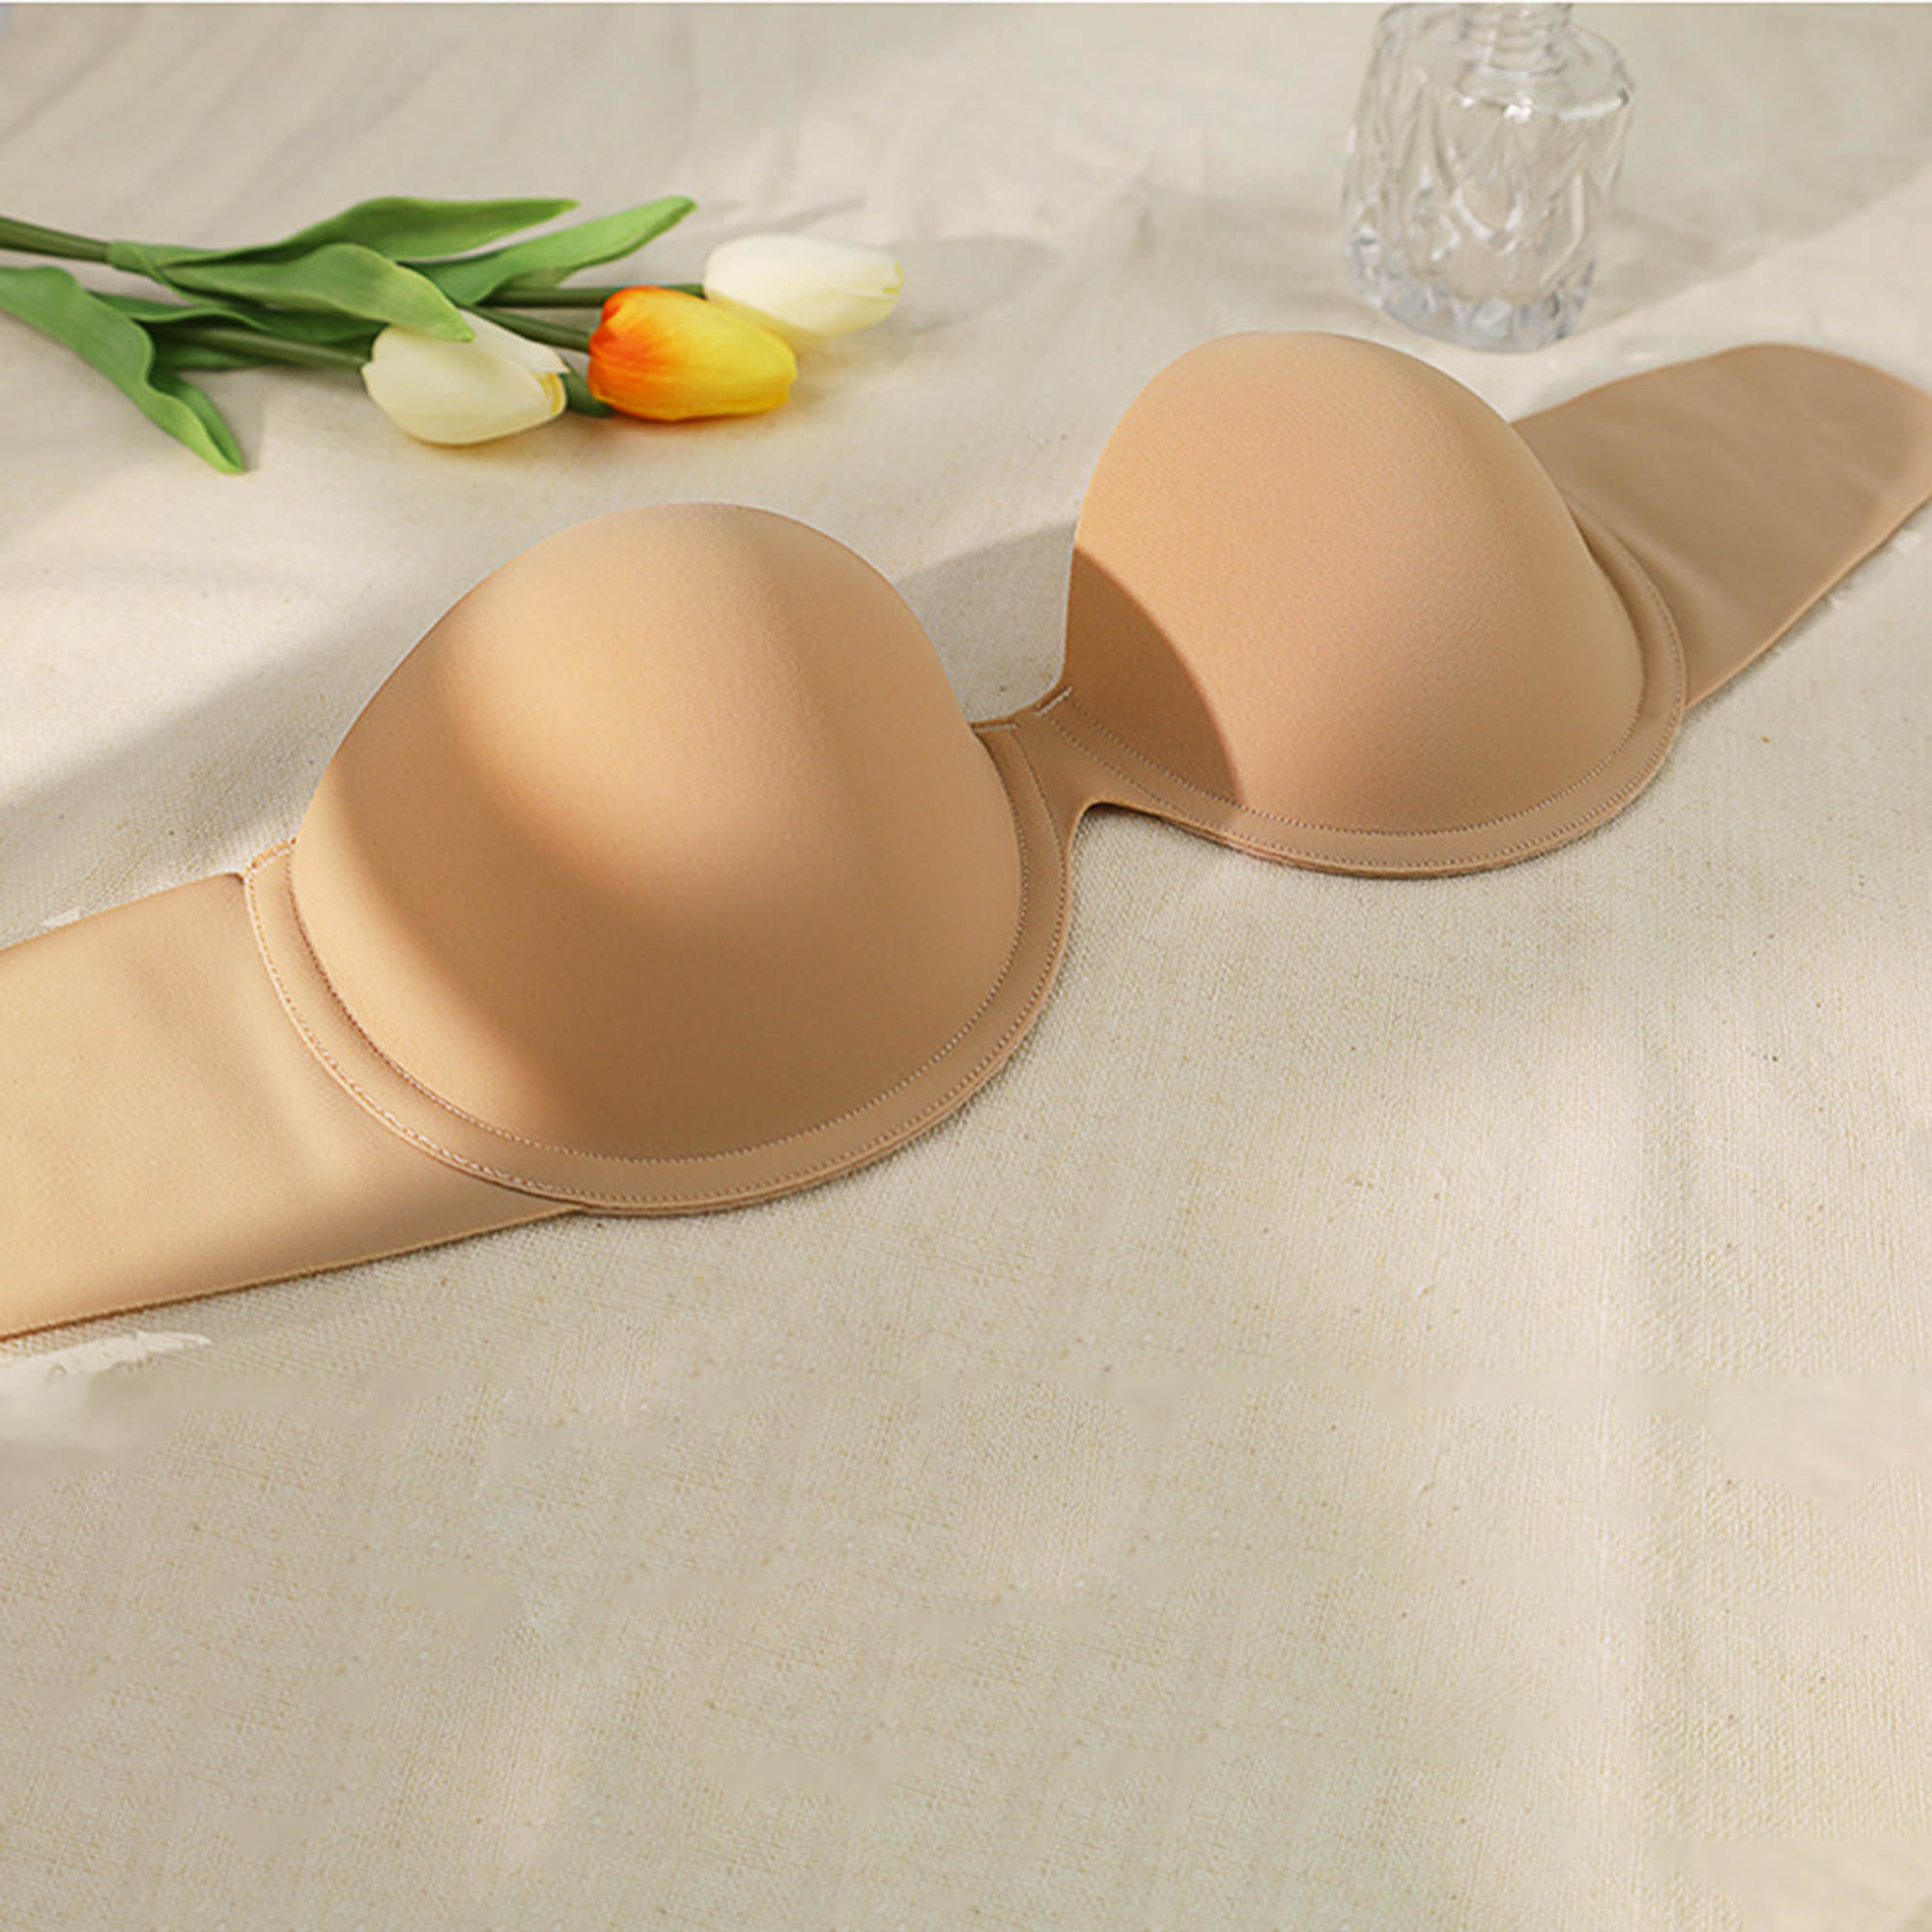 LOVEBIRD Adhesive Backless Underwire Strapless Bra With Push Up Padding